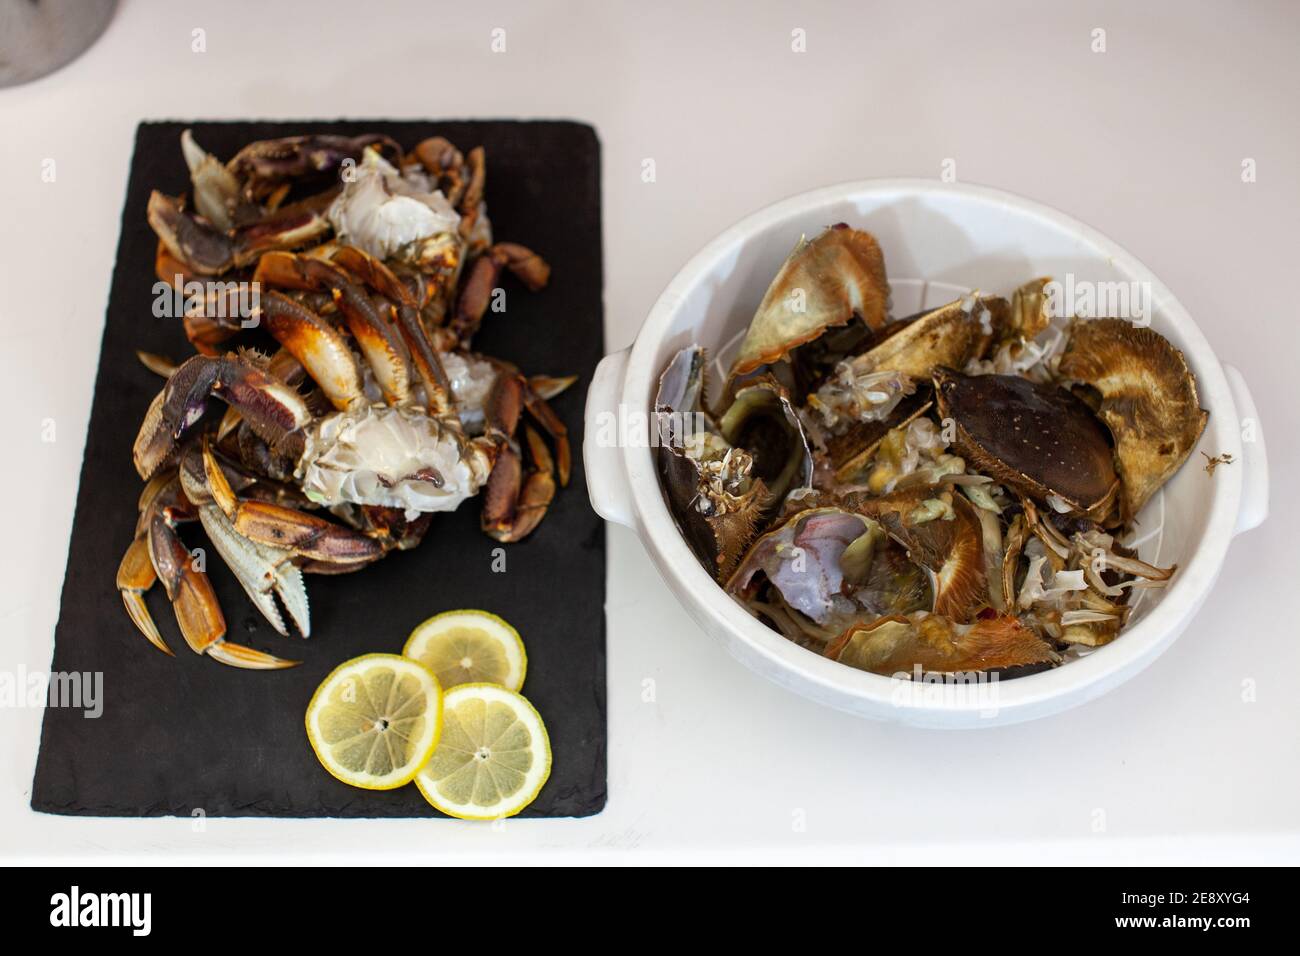 Dungeness crab legs are cleaned and prepared to be cooked for dinner. Crab guts and shells are discarded in a bowl beside them. Stock Photo